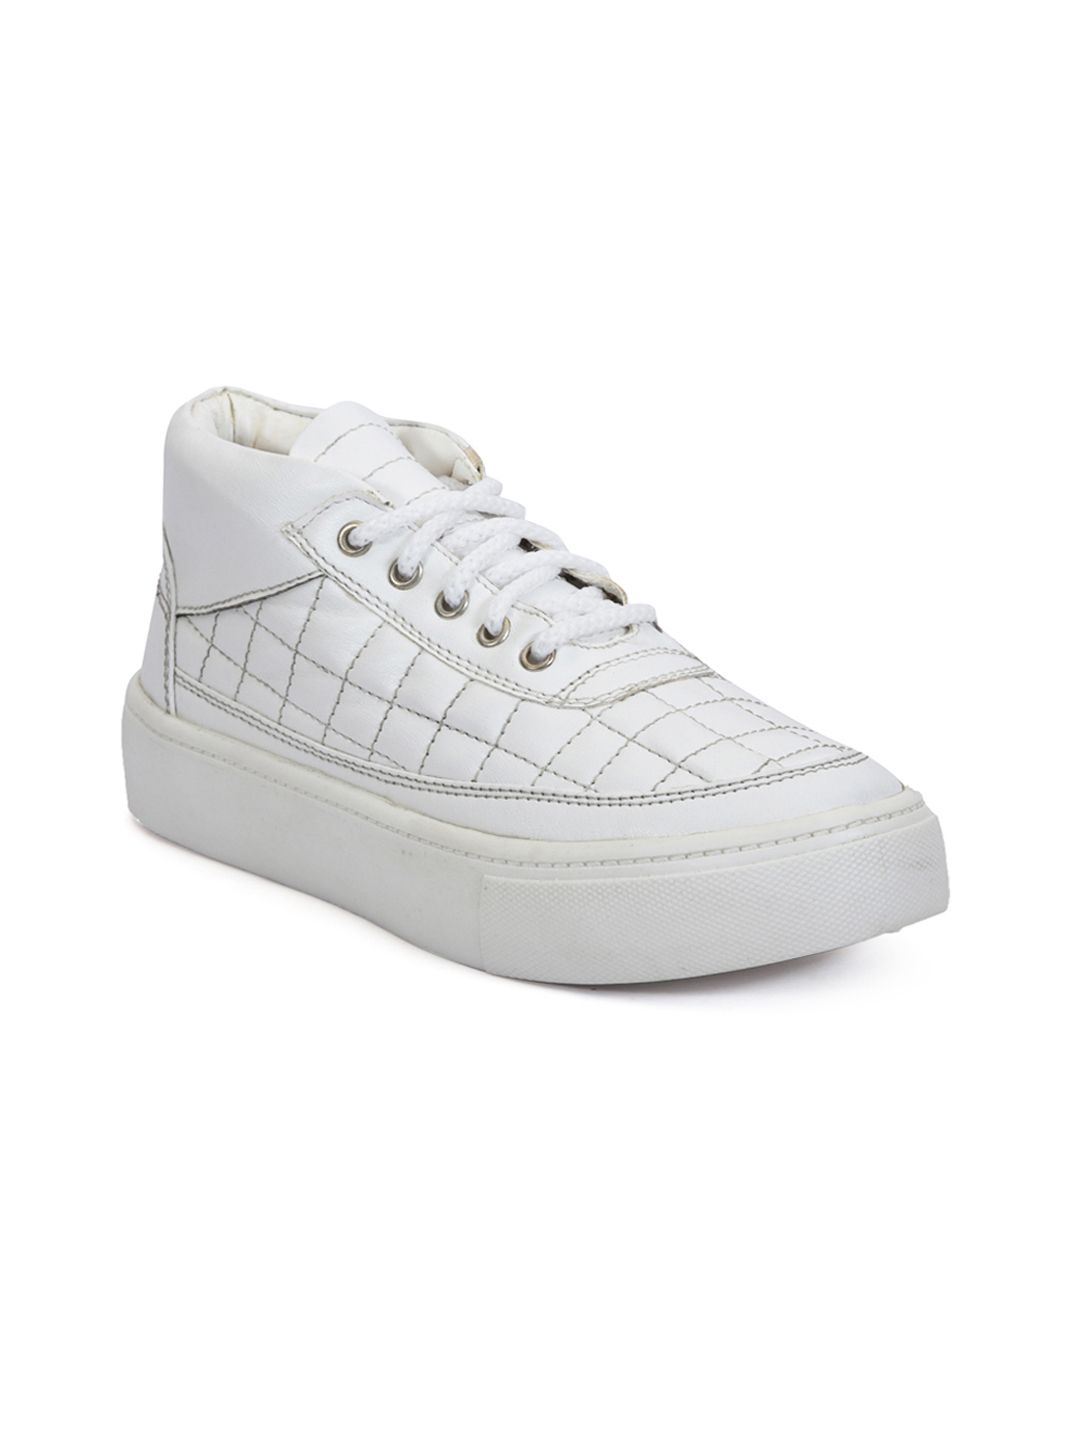 meriggiare Women White Textured Synthetic Leather Mid-Top Sneakers Price in India